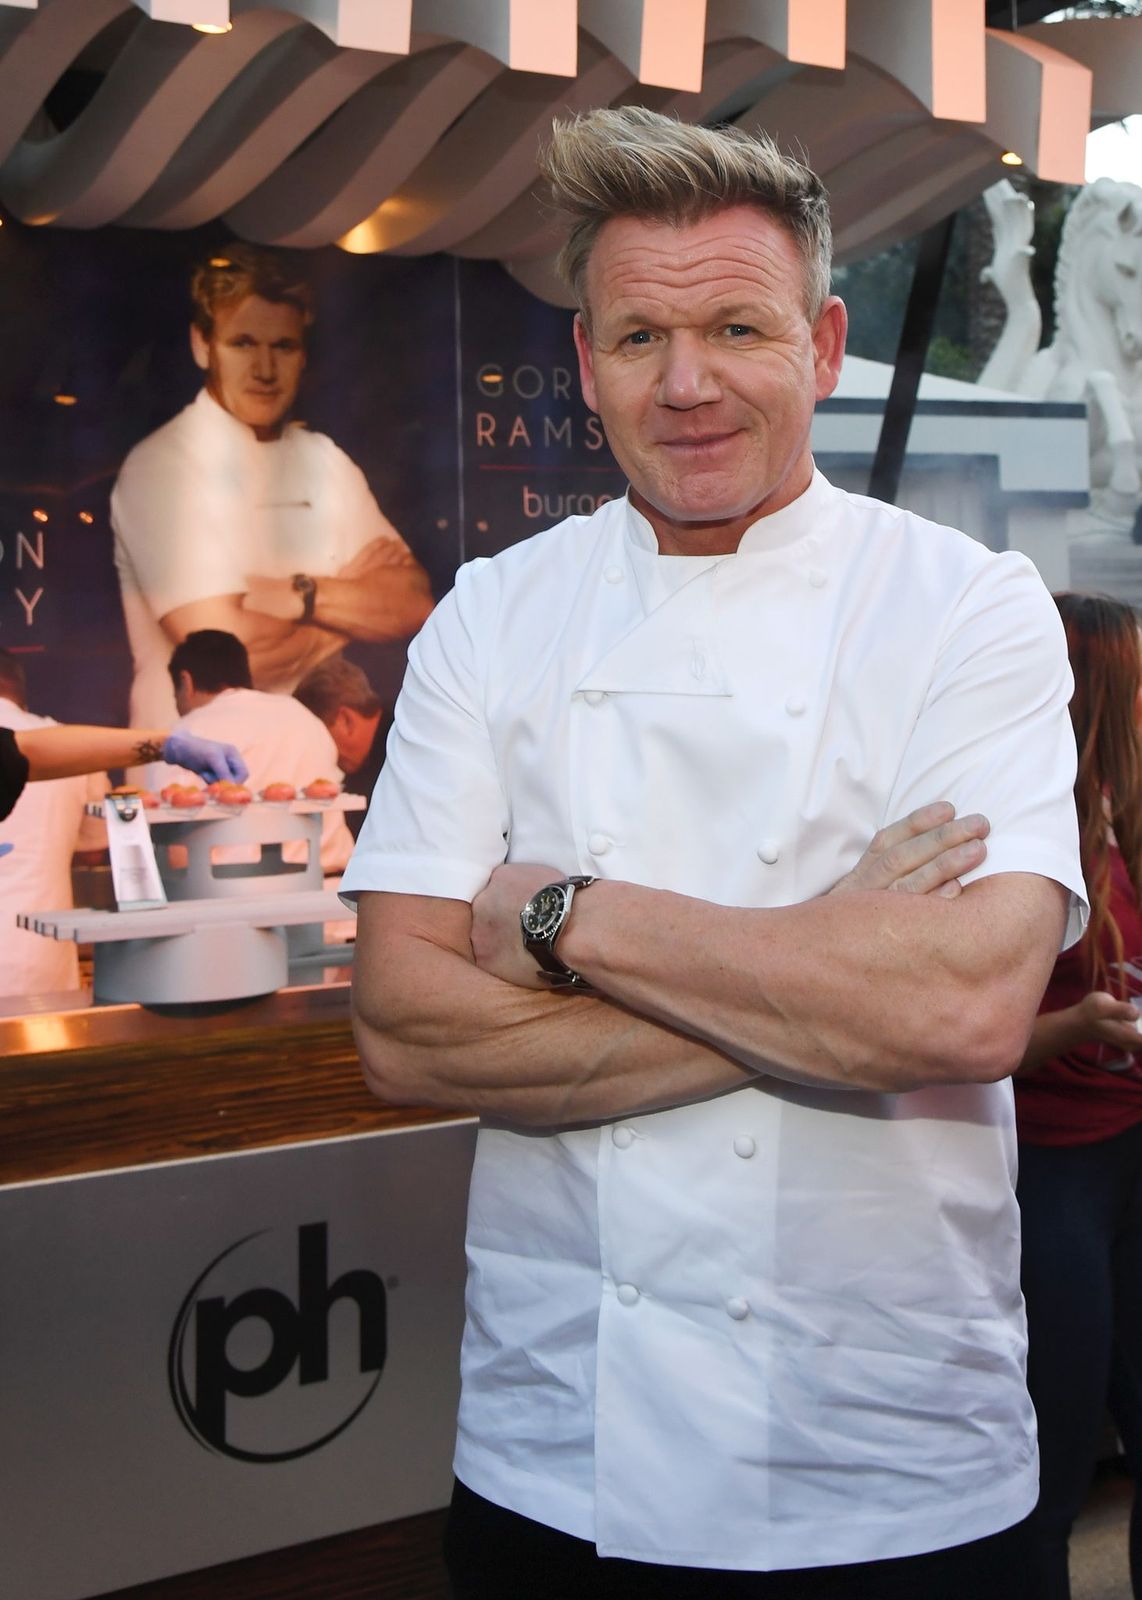 Chef Gordon Ramsay at the 12th annual Vegas Uncork'd by Bon Appetit Grand Tasting event at Caesars Palace in Las Vegas, Nevada | Photo: Ethan Miller/Getty Images for Vegas Uncork'd by Bon Appetit